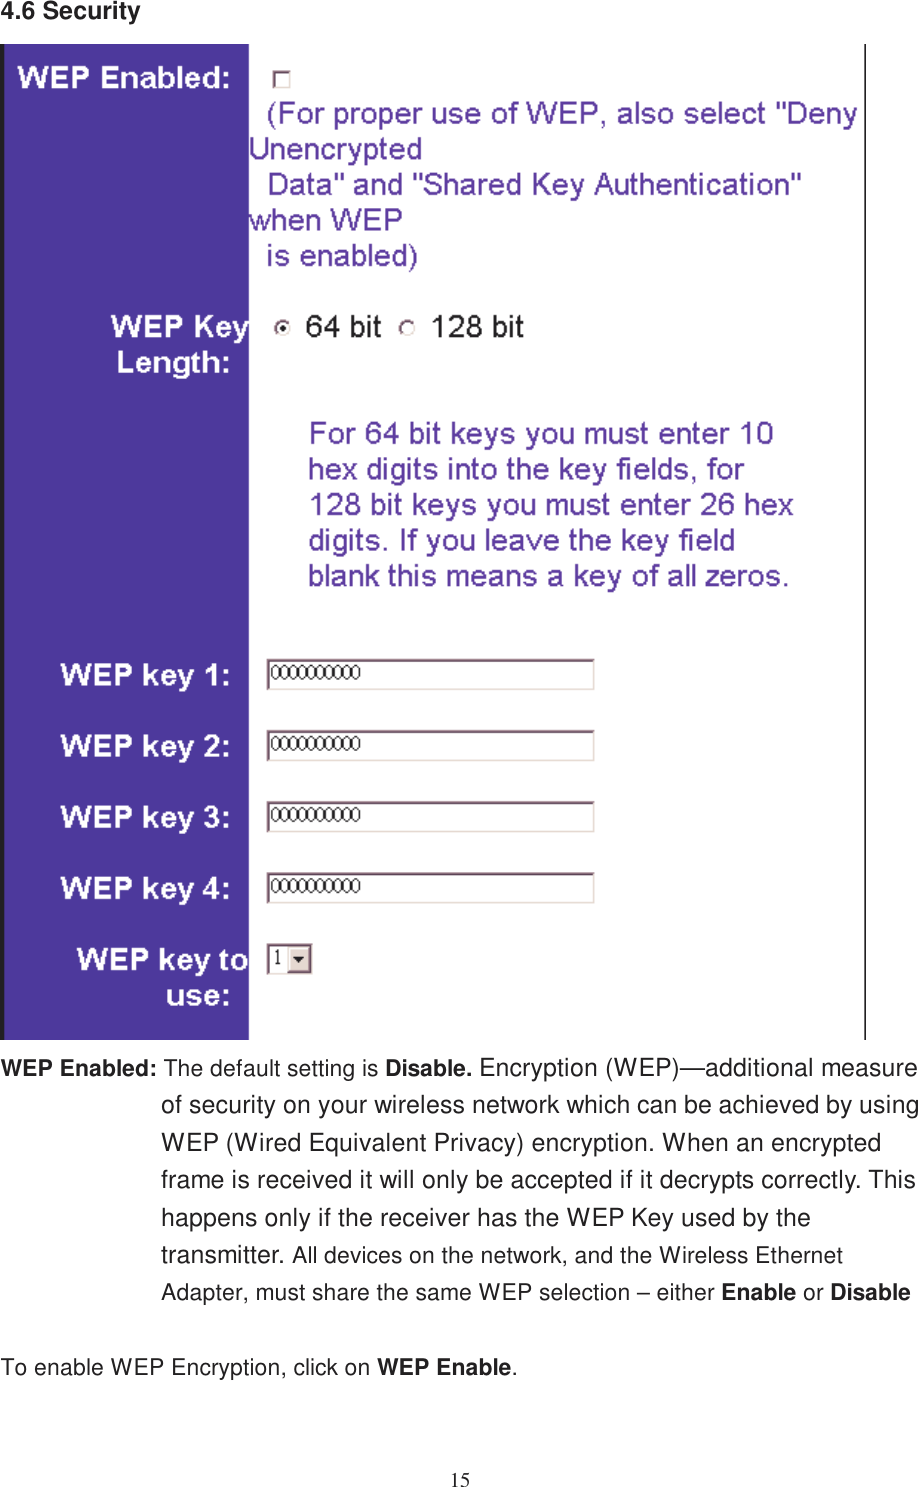 154.6 SecurityWEP Enabled: The default setting is Disable. Encryption (WEP)—additional measureof security on your wireless network which can be achieved by usingWEP (Wired Equivalent Privacy) encryption. When an encryptedframe is received it will only be accepted if it decrypts correctly. Thishappens only if the receiver has the WEP Key used by thetransmitter. All devices on the network, and the Wireless EthernetAdapter, must share the same WEP selection – either Enable or DisableTo enable WEP Encryption, click on WEP Enable.